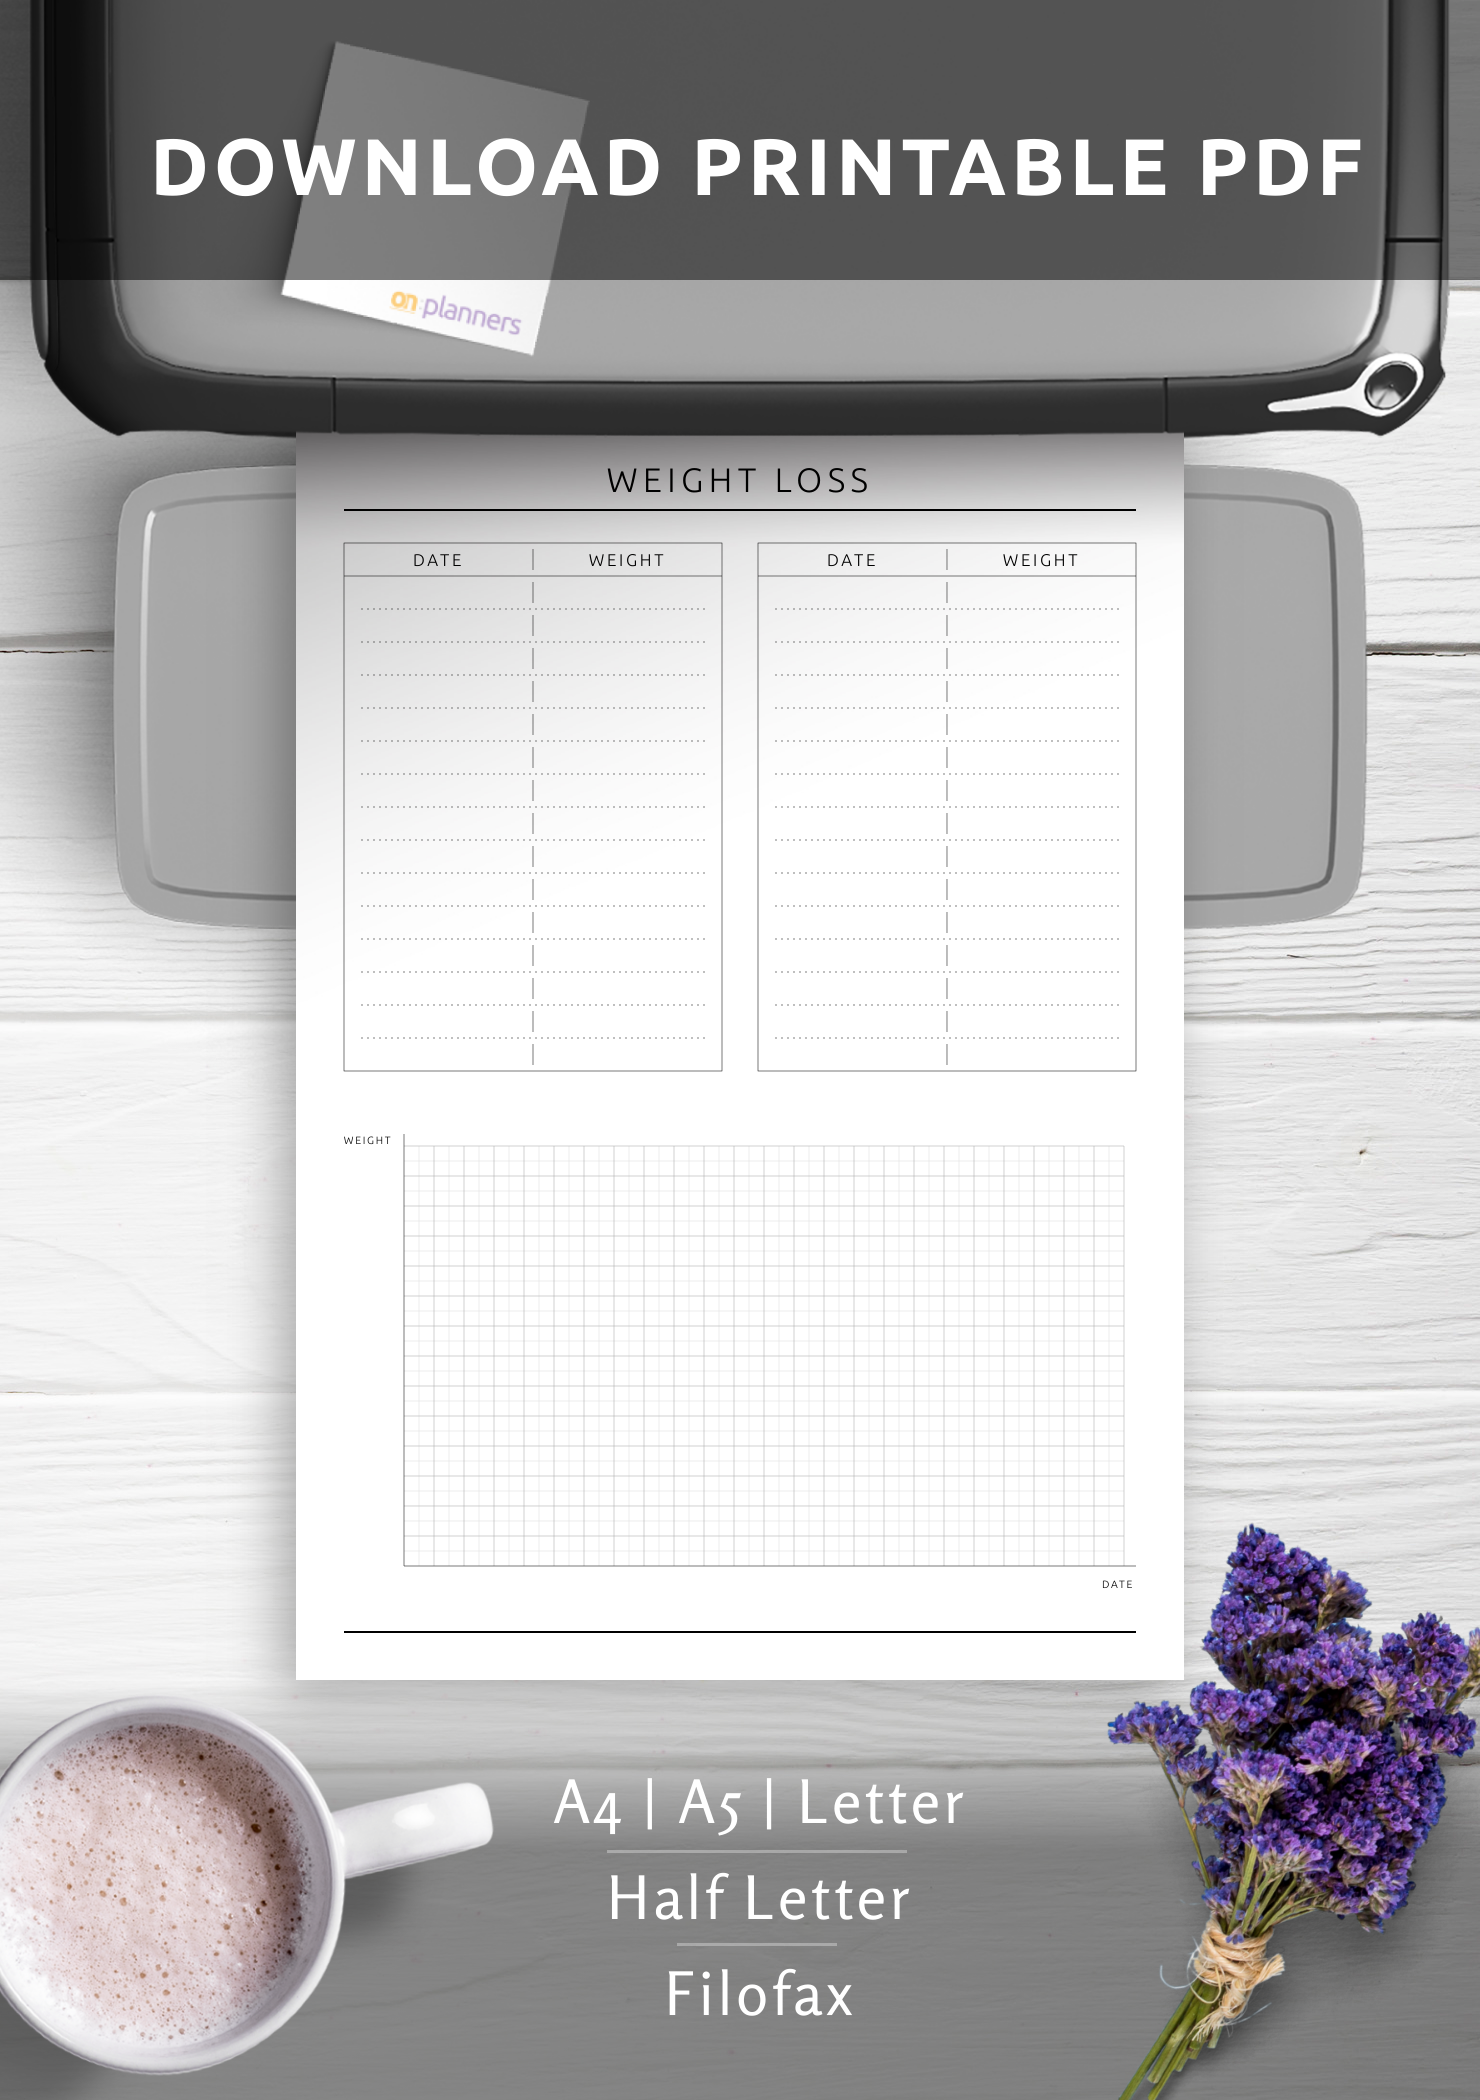 download printable weight loss tracker template pdf